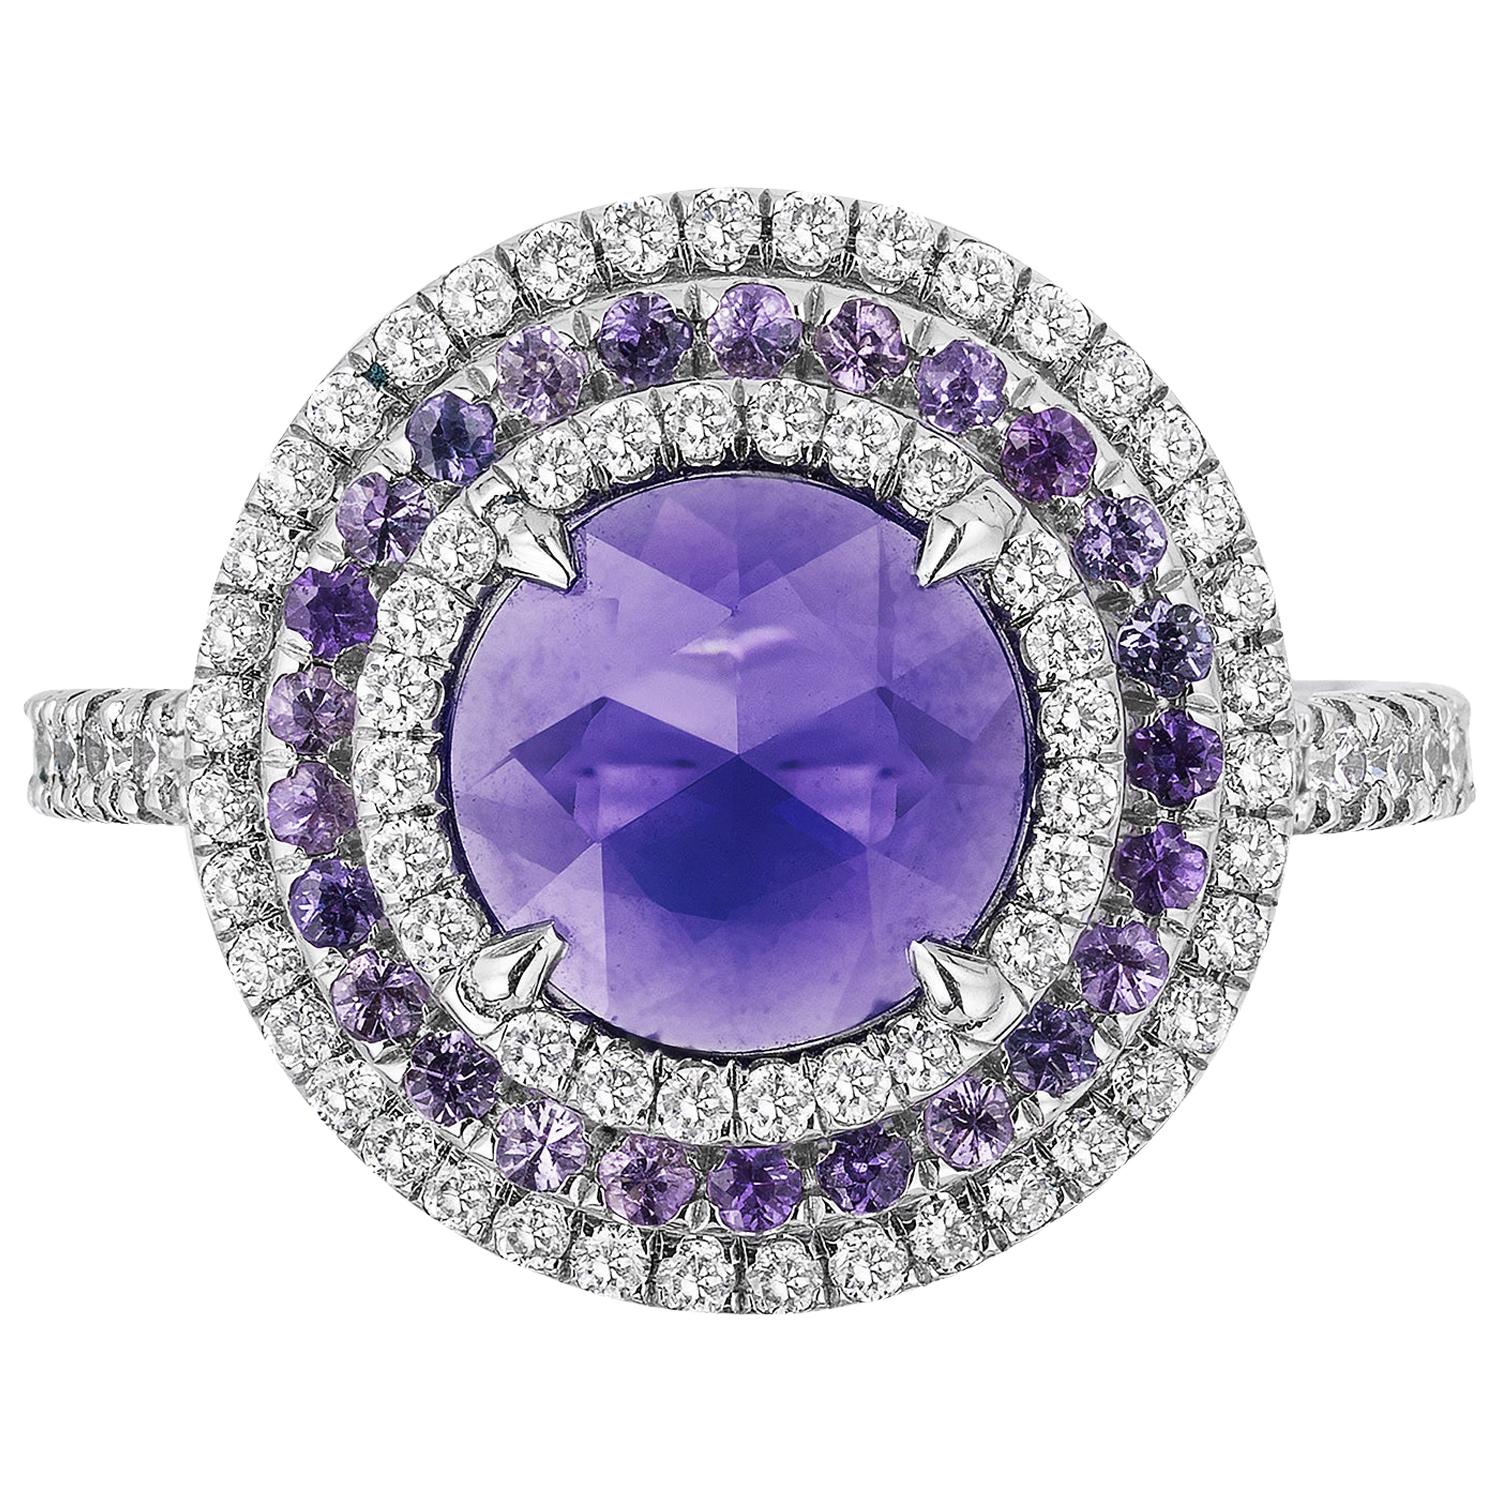 Bayco CDC Certified 1.54 Carat Purple Sapphire Platinum Cocktail Ring For Sale